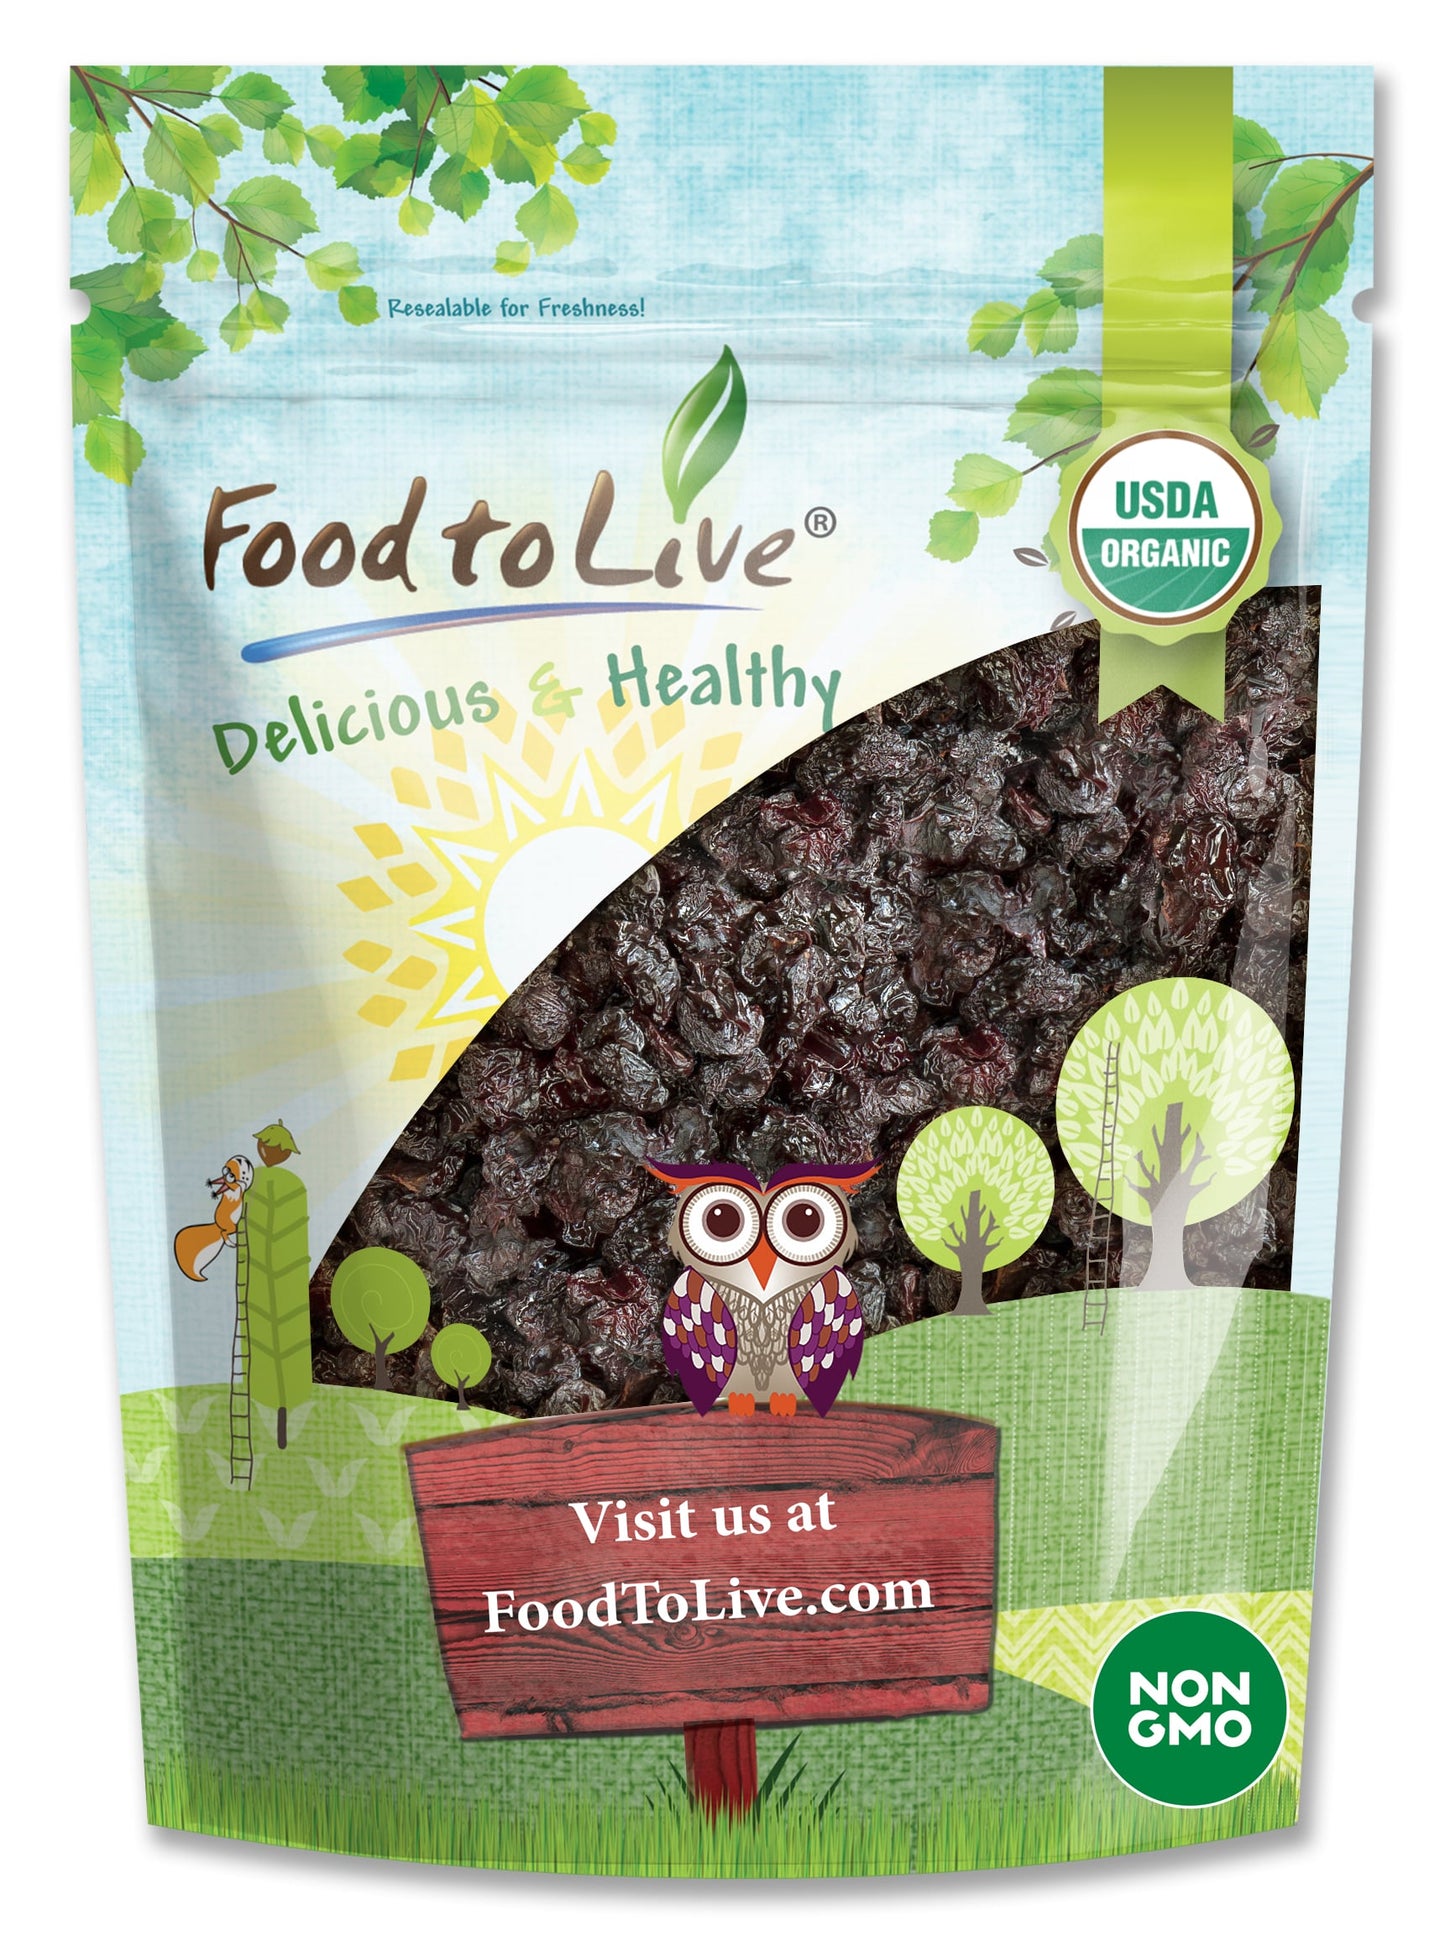 Organic Dried Sour Cherries - Pitted Cherry Fruit, Non-GMO, Raw, Sun-Dried, Unsweetened, Unsulfured, No Oil Added, Vegan, Kosher, Bulk, Prunus Cerasus – by Food to Live